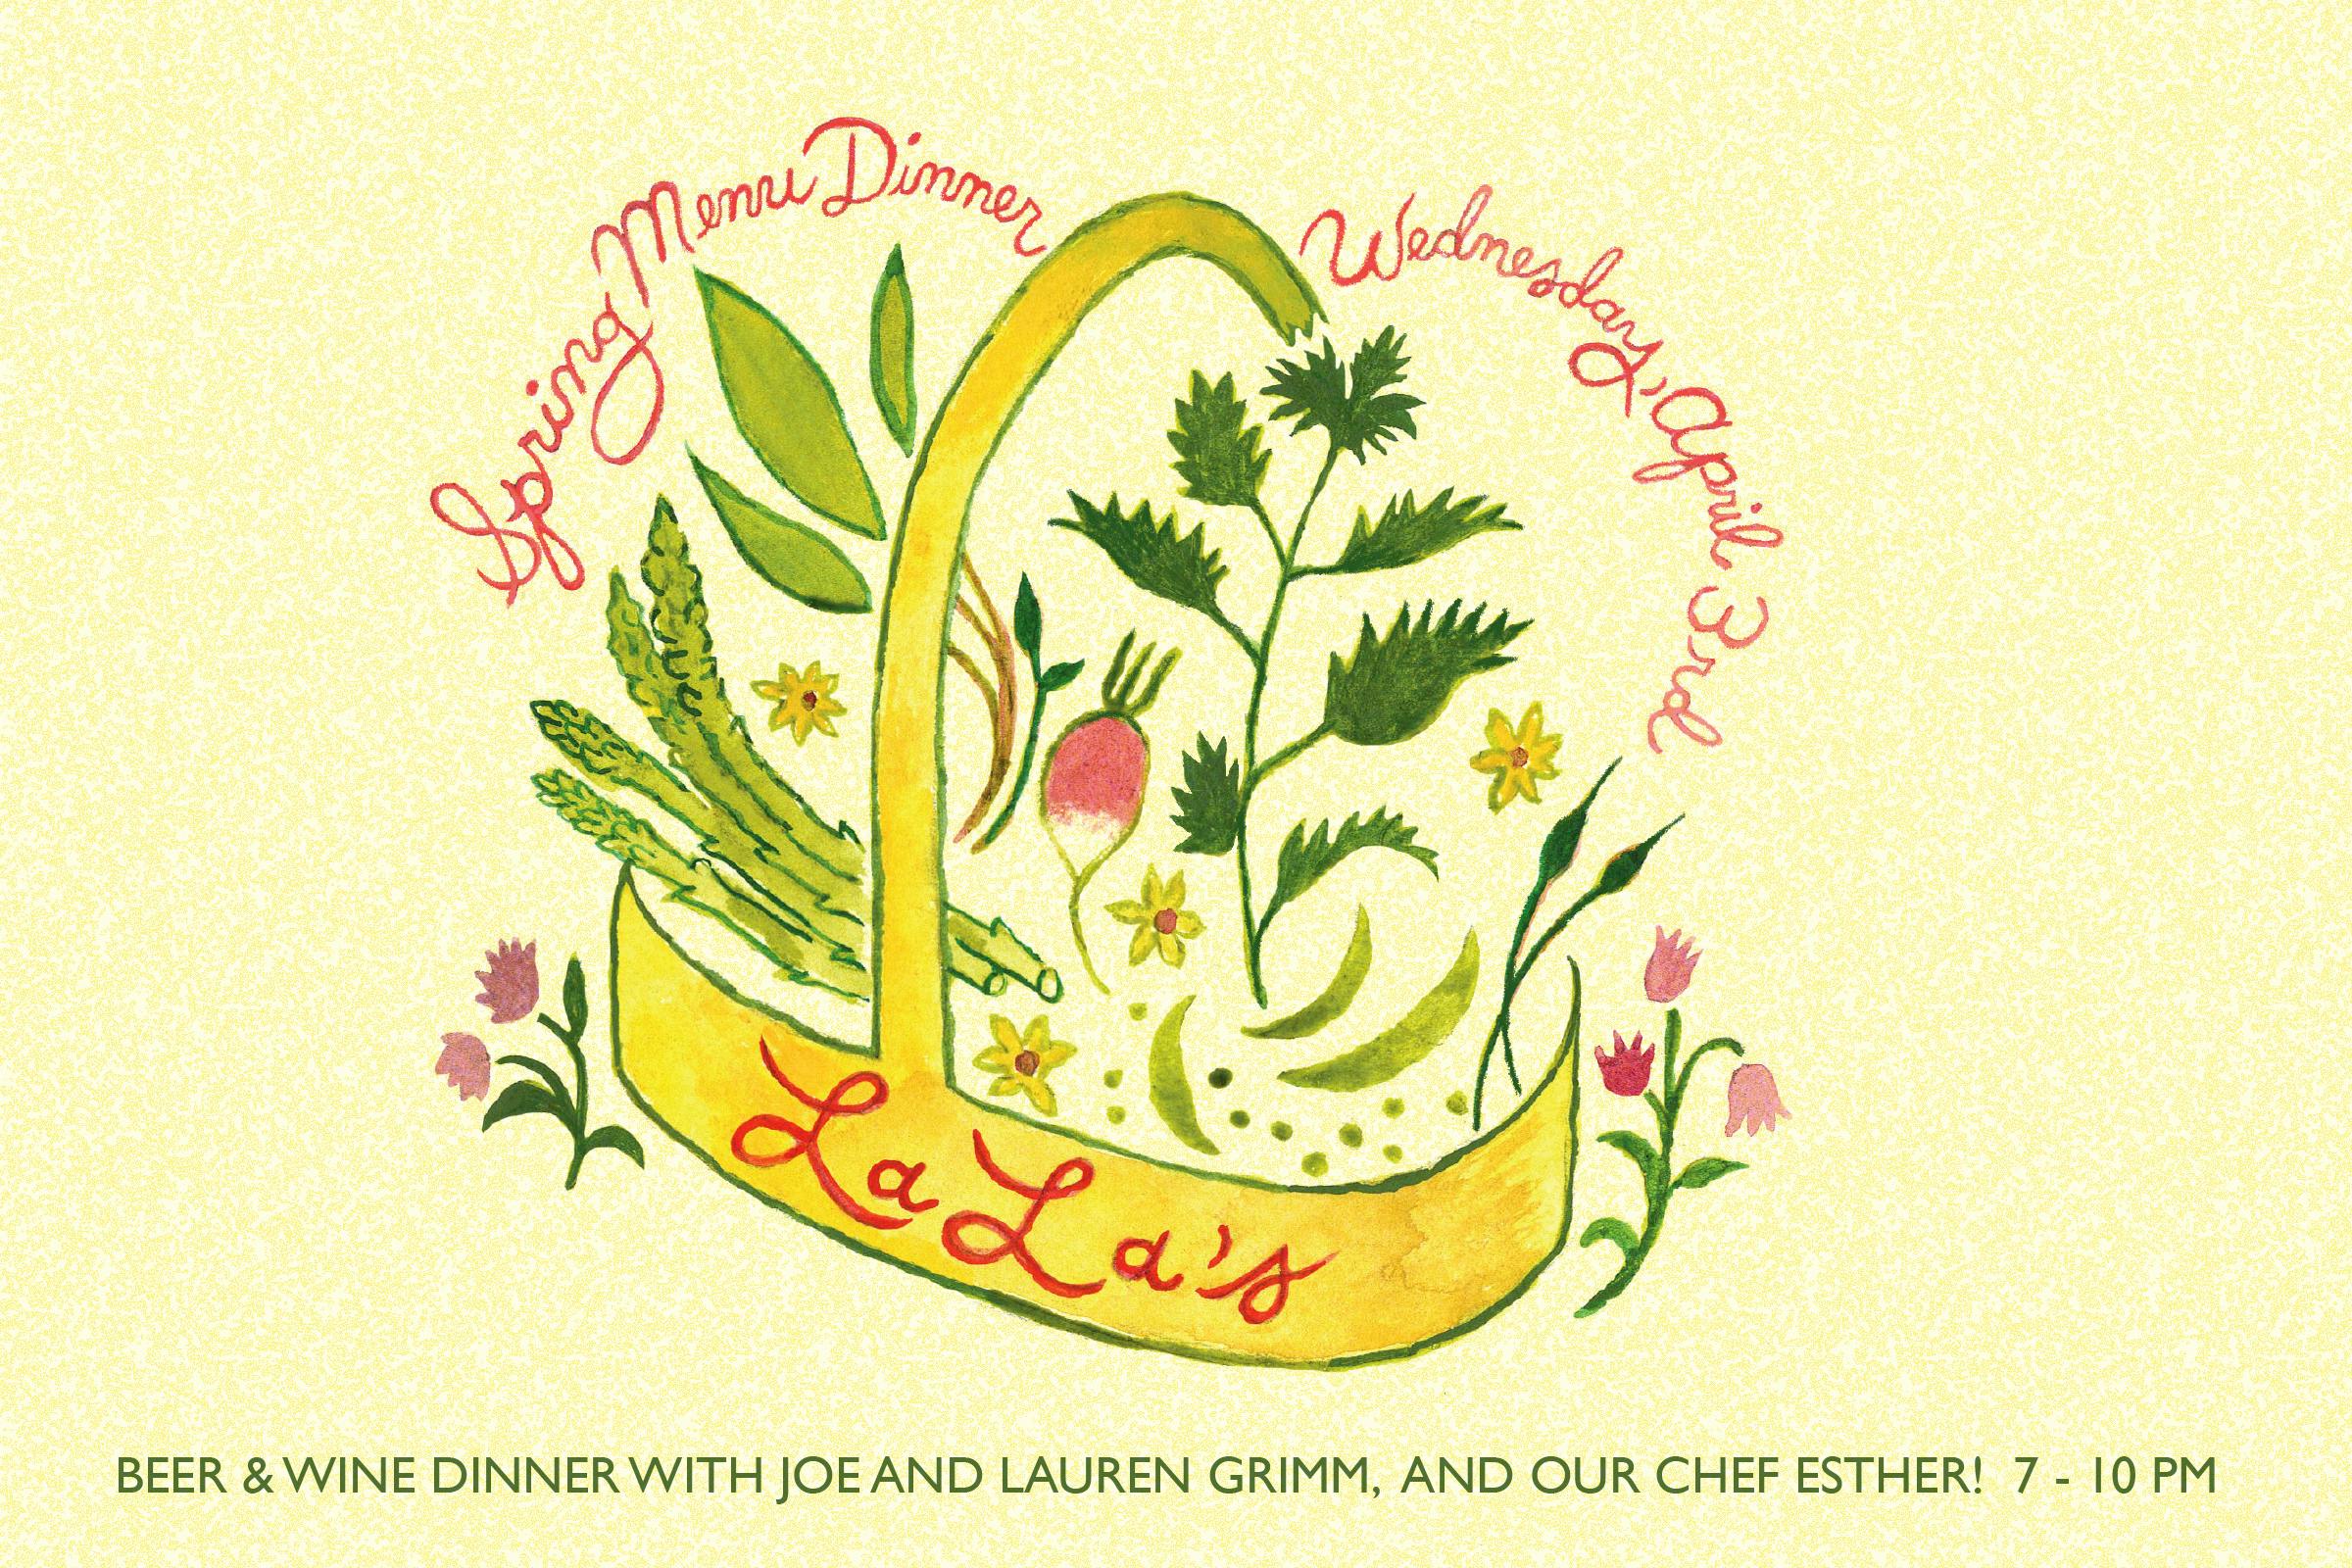 Spring Menu Dinner Wednesday, April 3rd (written in cursive). BEER & WINE DINNER WITH JOE AND LAUREN GRIMM, AND OUR CHEF ESTHER! 7-10PM. (with a hand drawn basket with vegetables an flowers in pink, green, and yellow. Lala's is written on the basket in red cursive.)